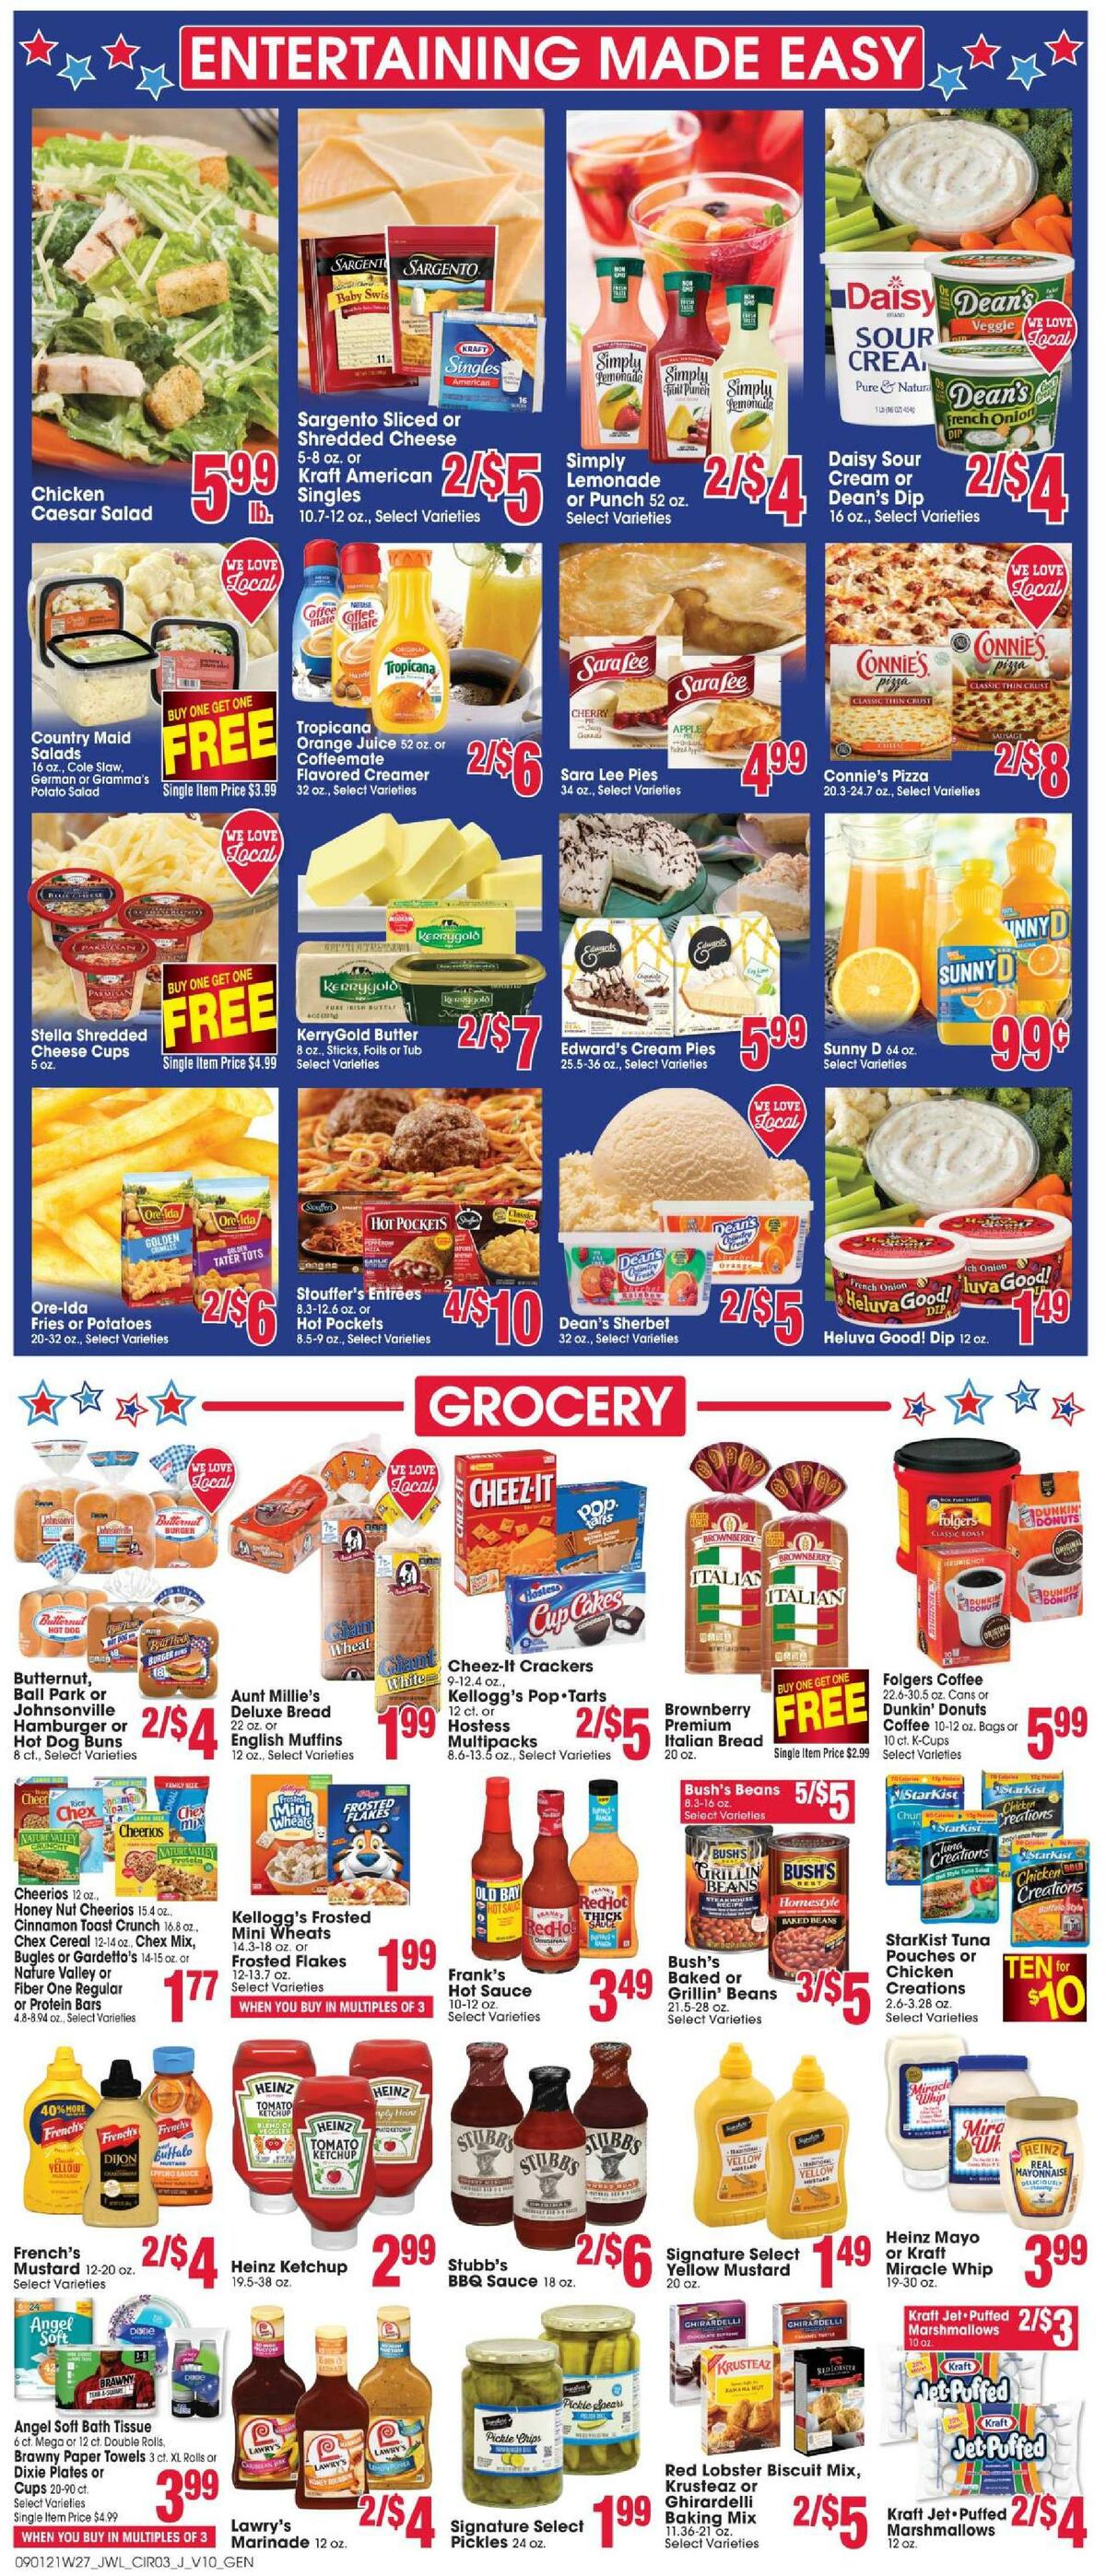 Jewel Osco Weekly Ad from September 1